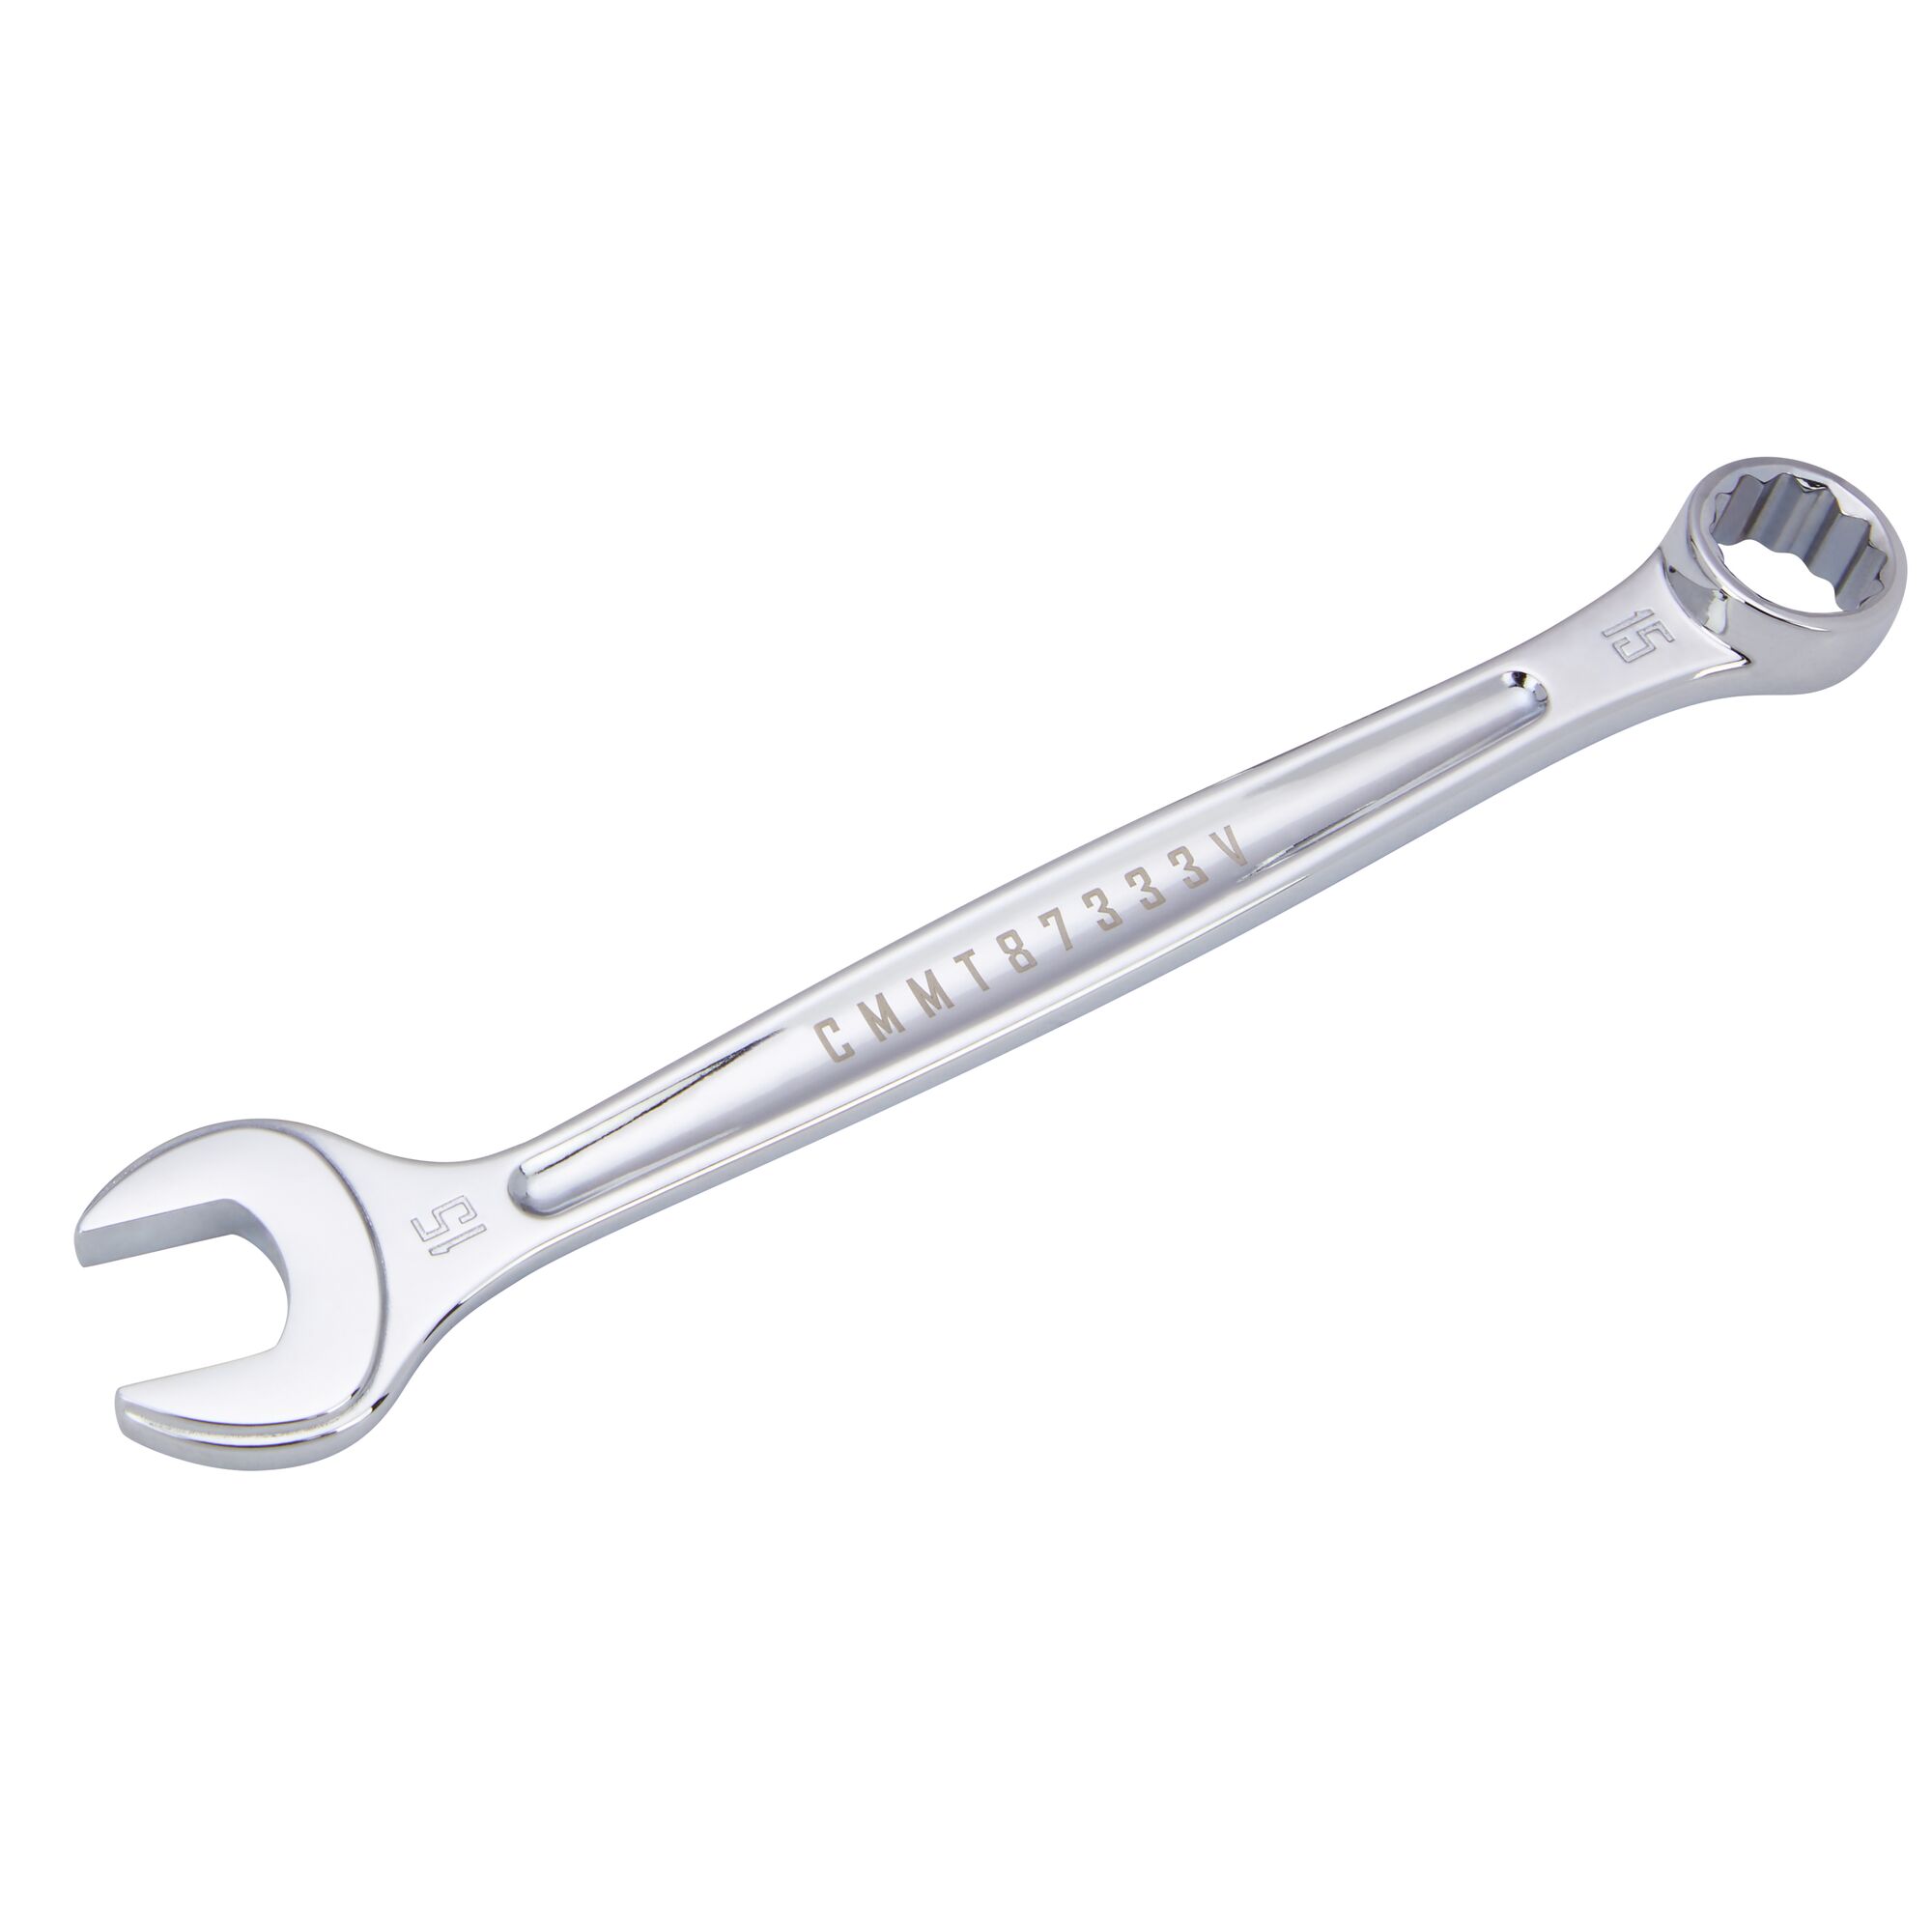 CRAFTSMAN V-SERIES Combo Wrench 15MM 